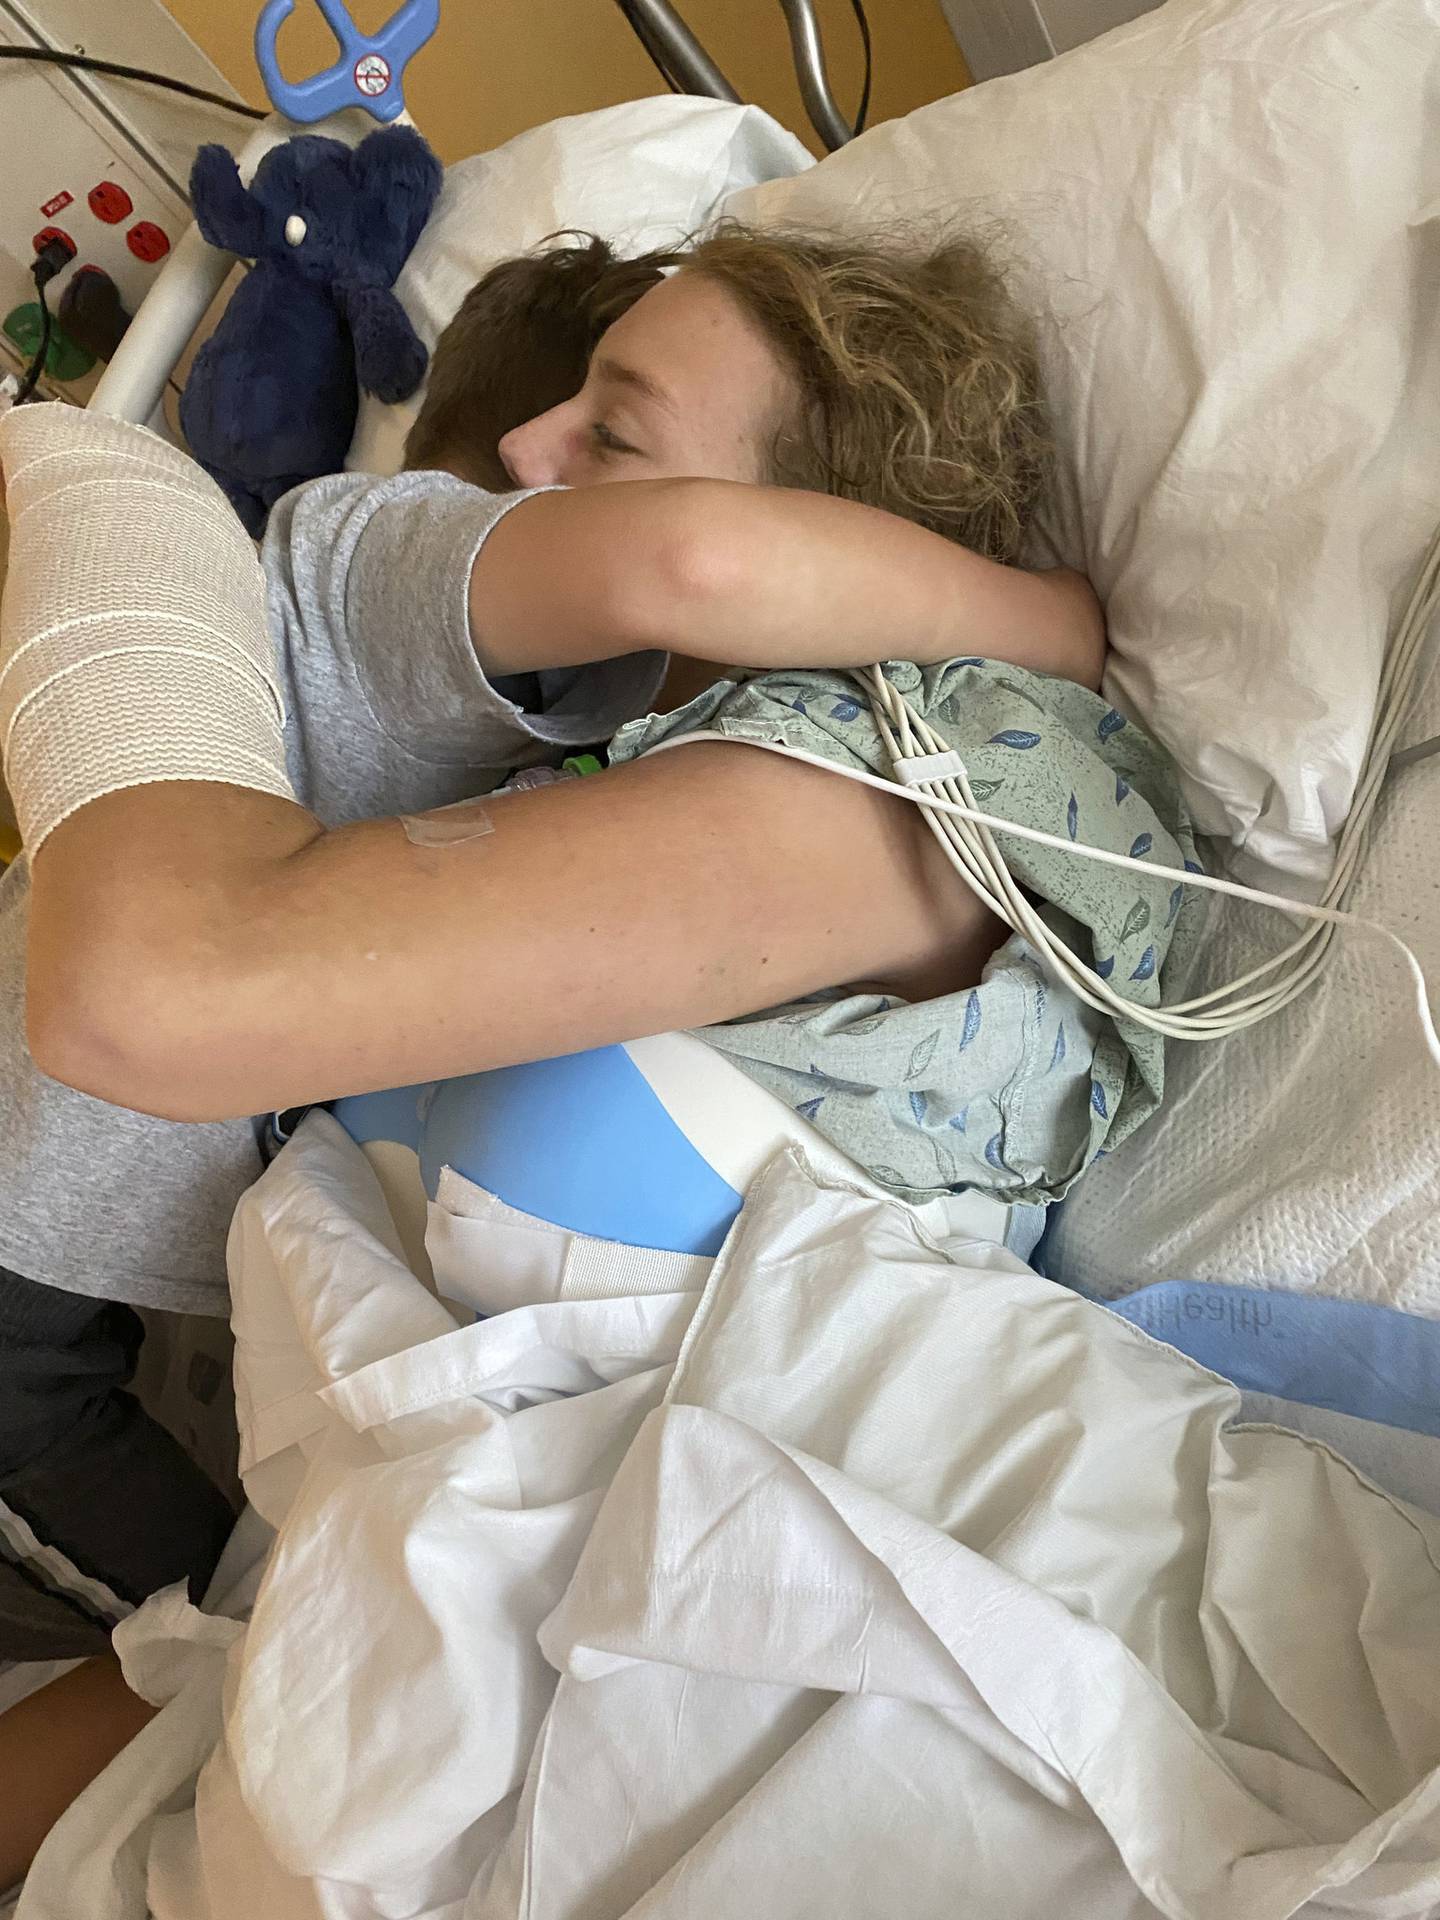 Silas Mitchell hugs his sister Jasper Fidler for the first time in the ICU after Jasper was hospitalized from a rock climbing accident. Silas and Jasper wrote a song together for the Sing Me a Story project. 